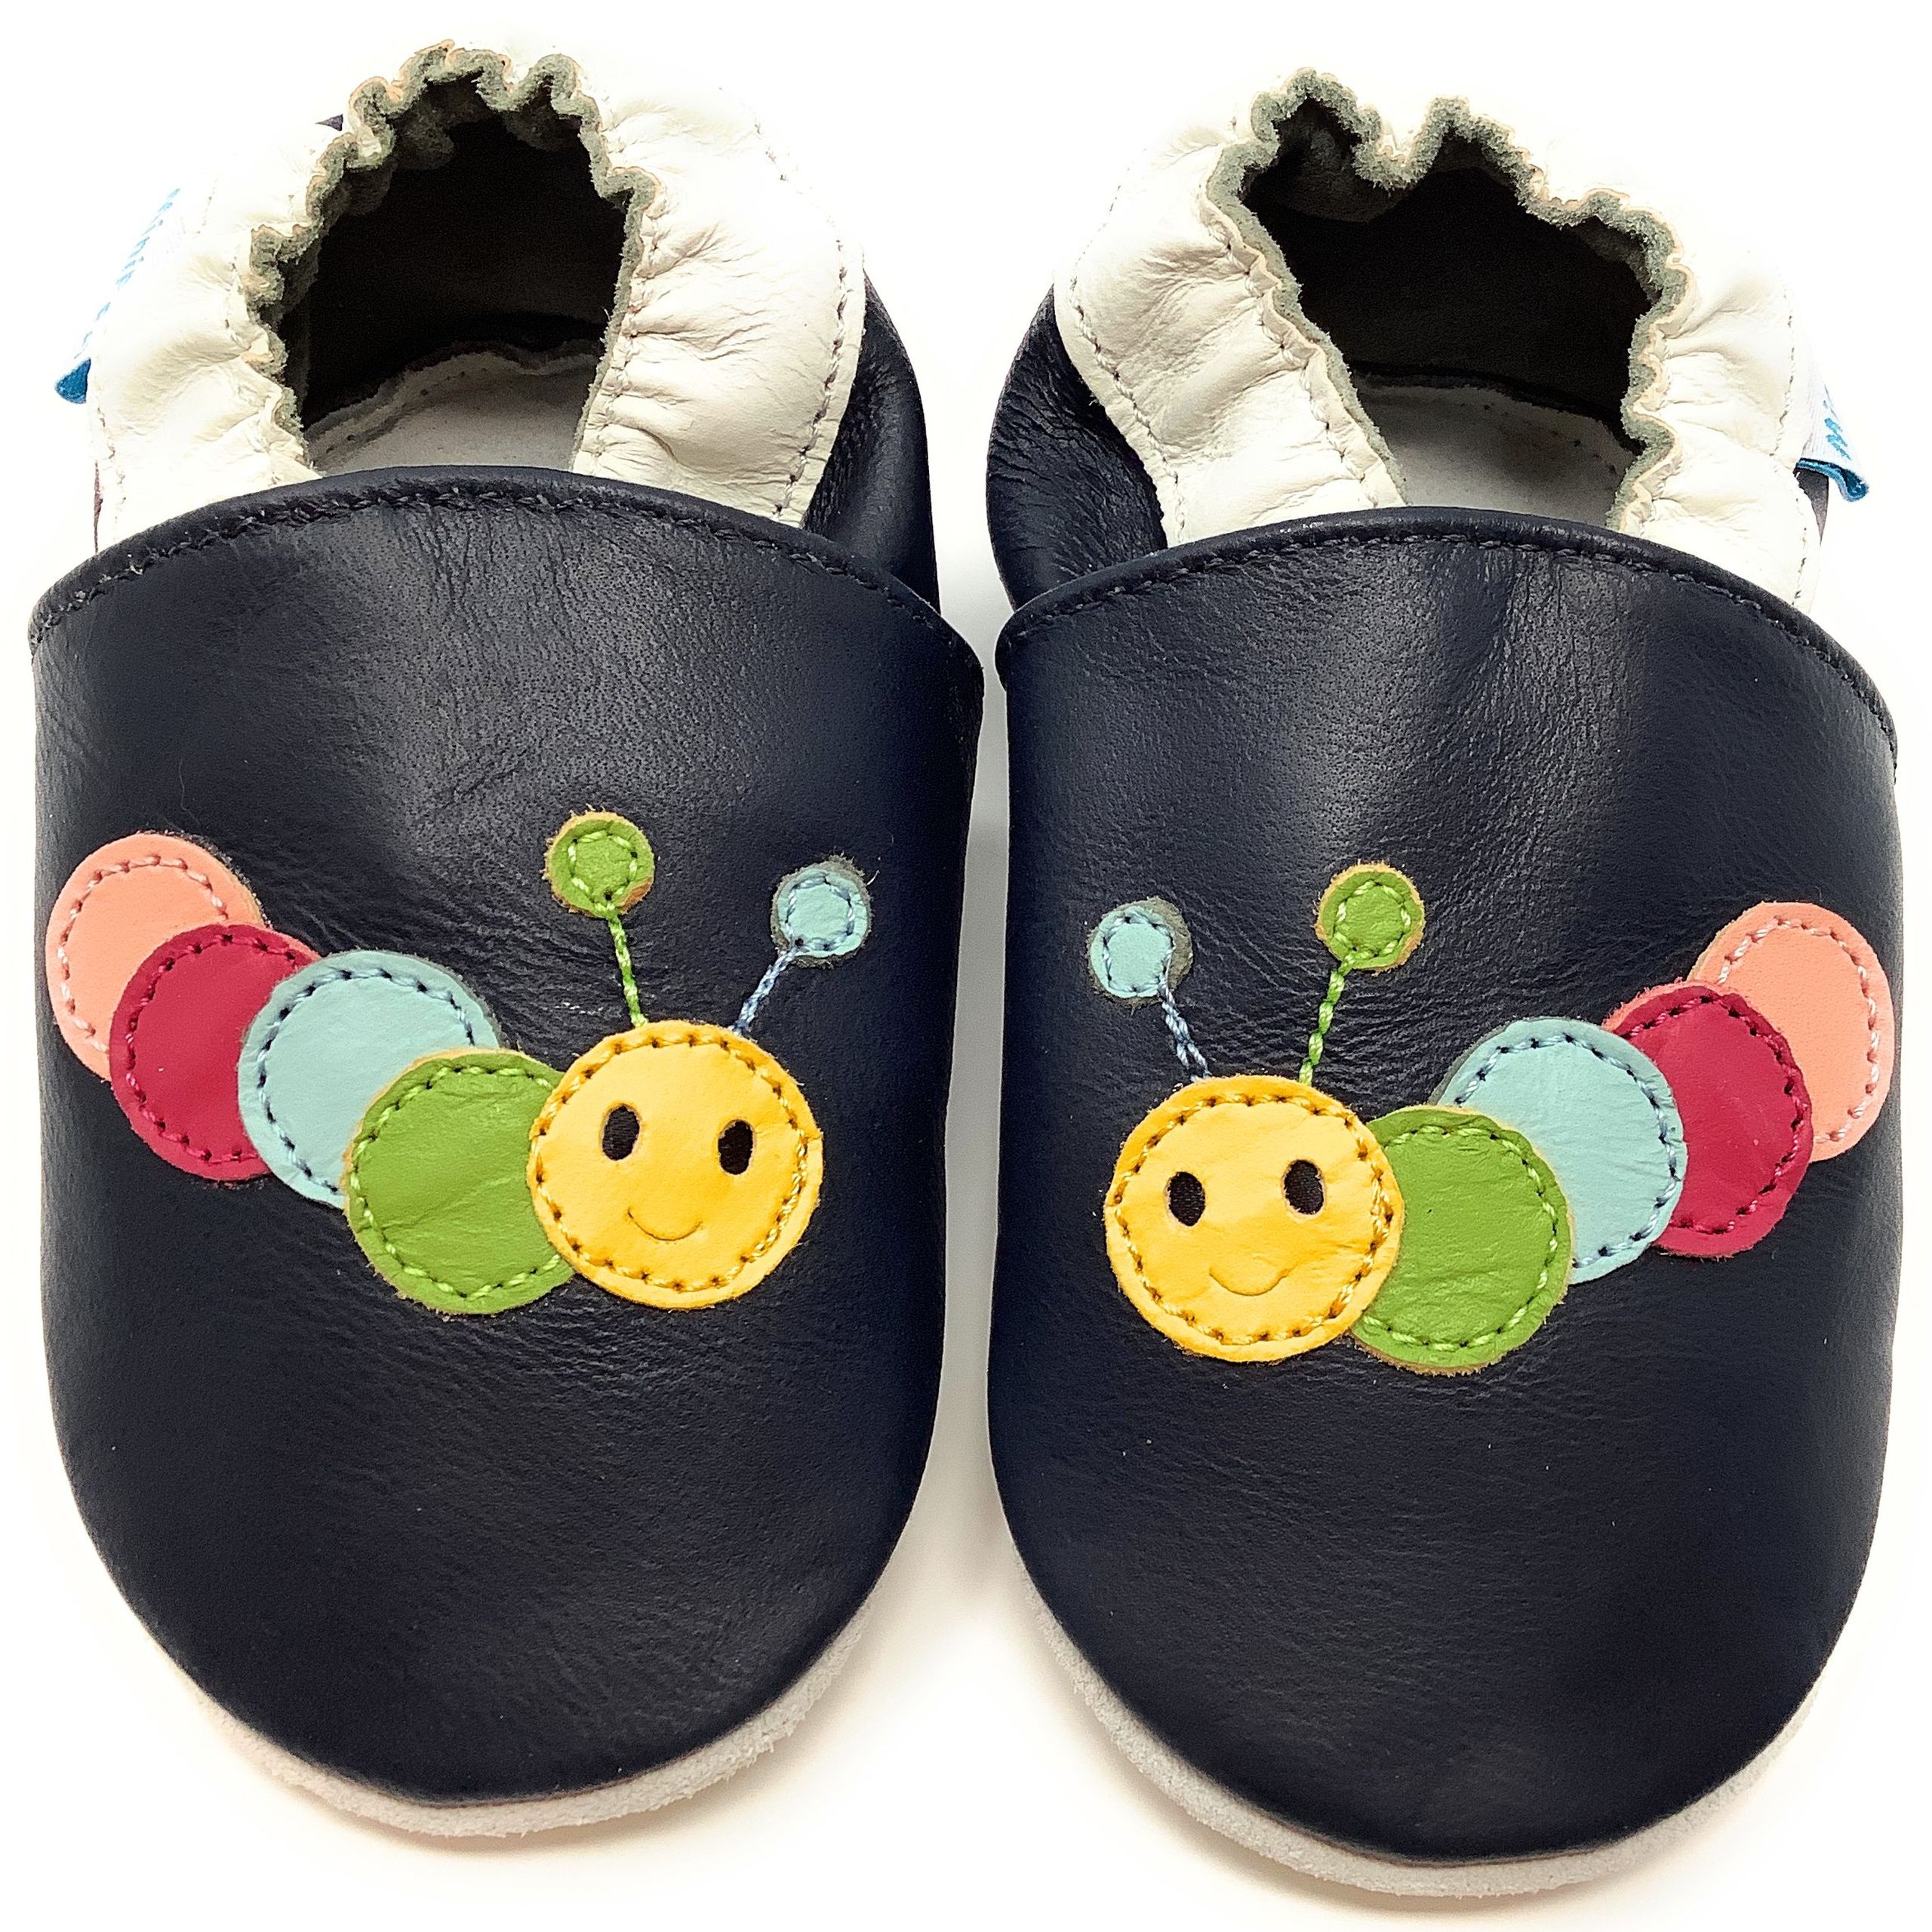 MINIFEET SOFT LEATHER BABY SHOES 0-6,6-12,12-18,18-24 Months & 2-3 Years OWLS 